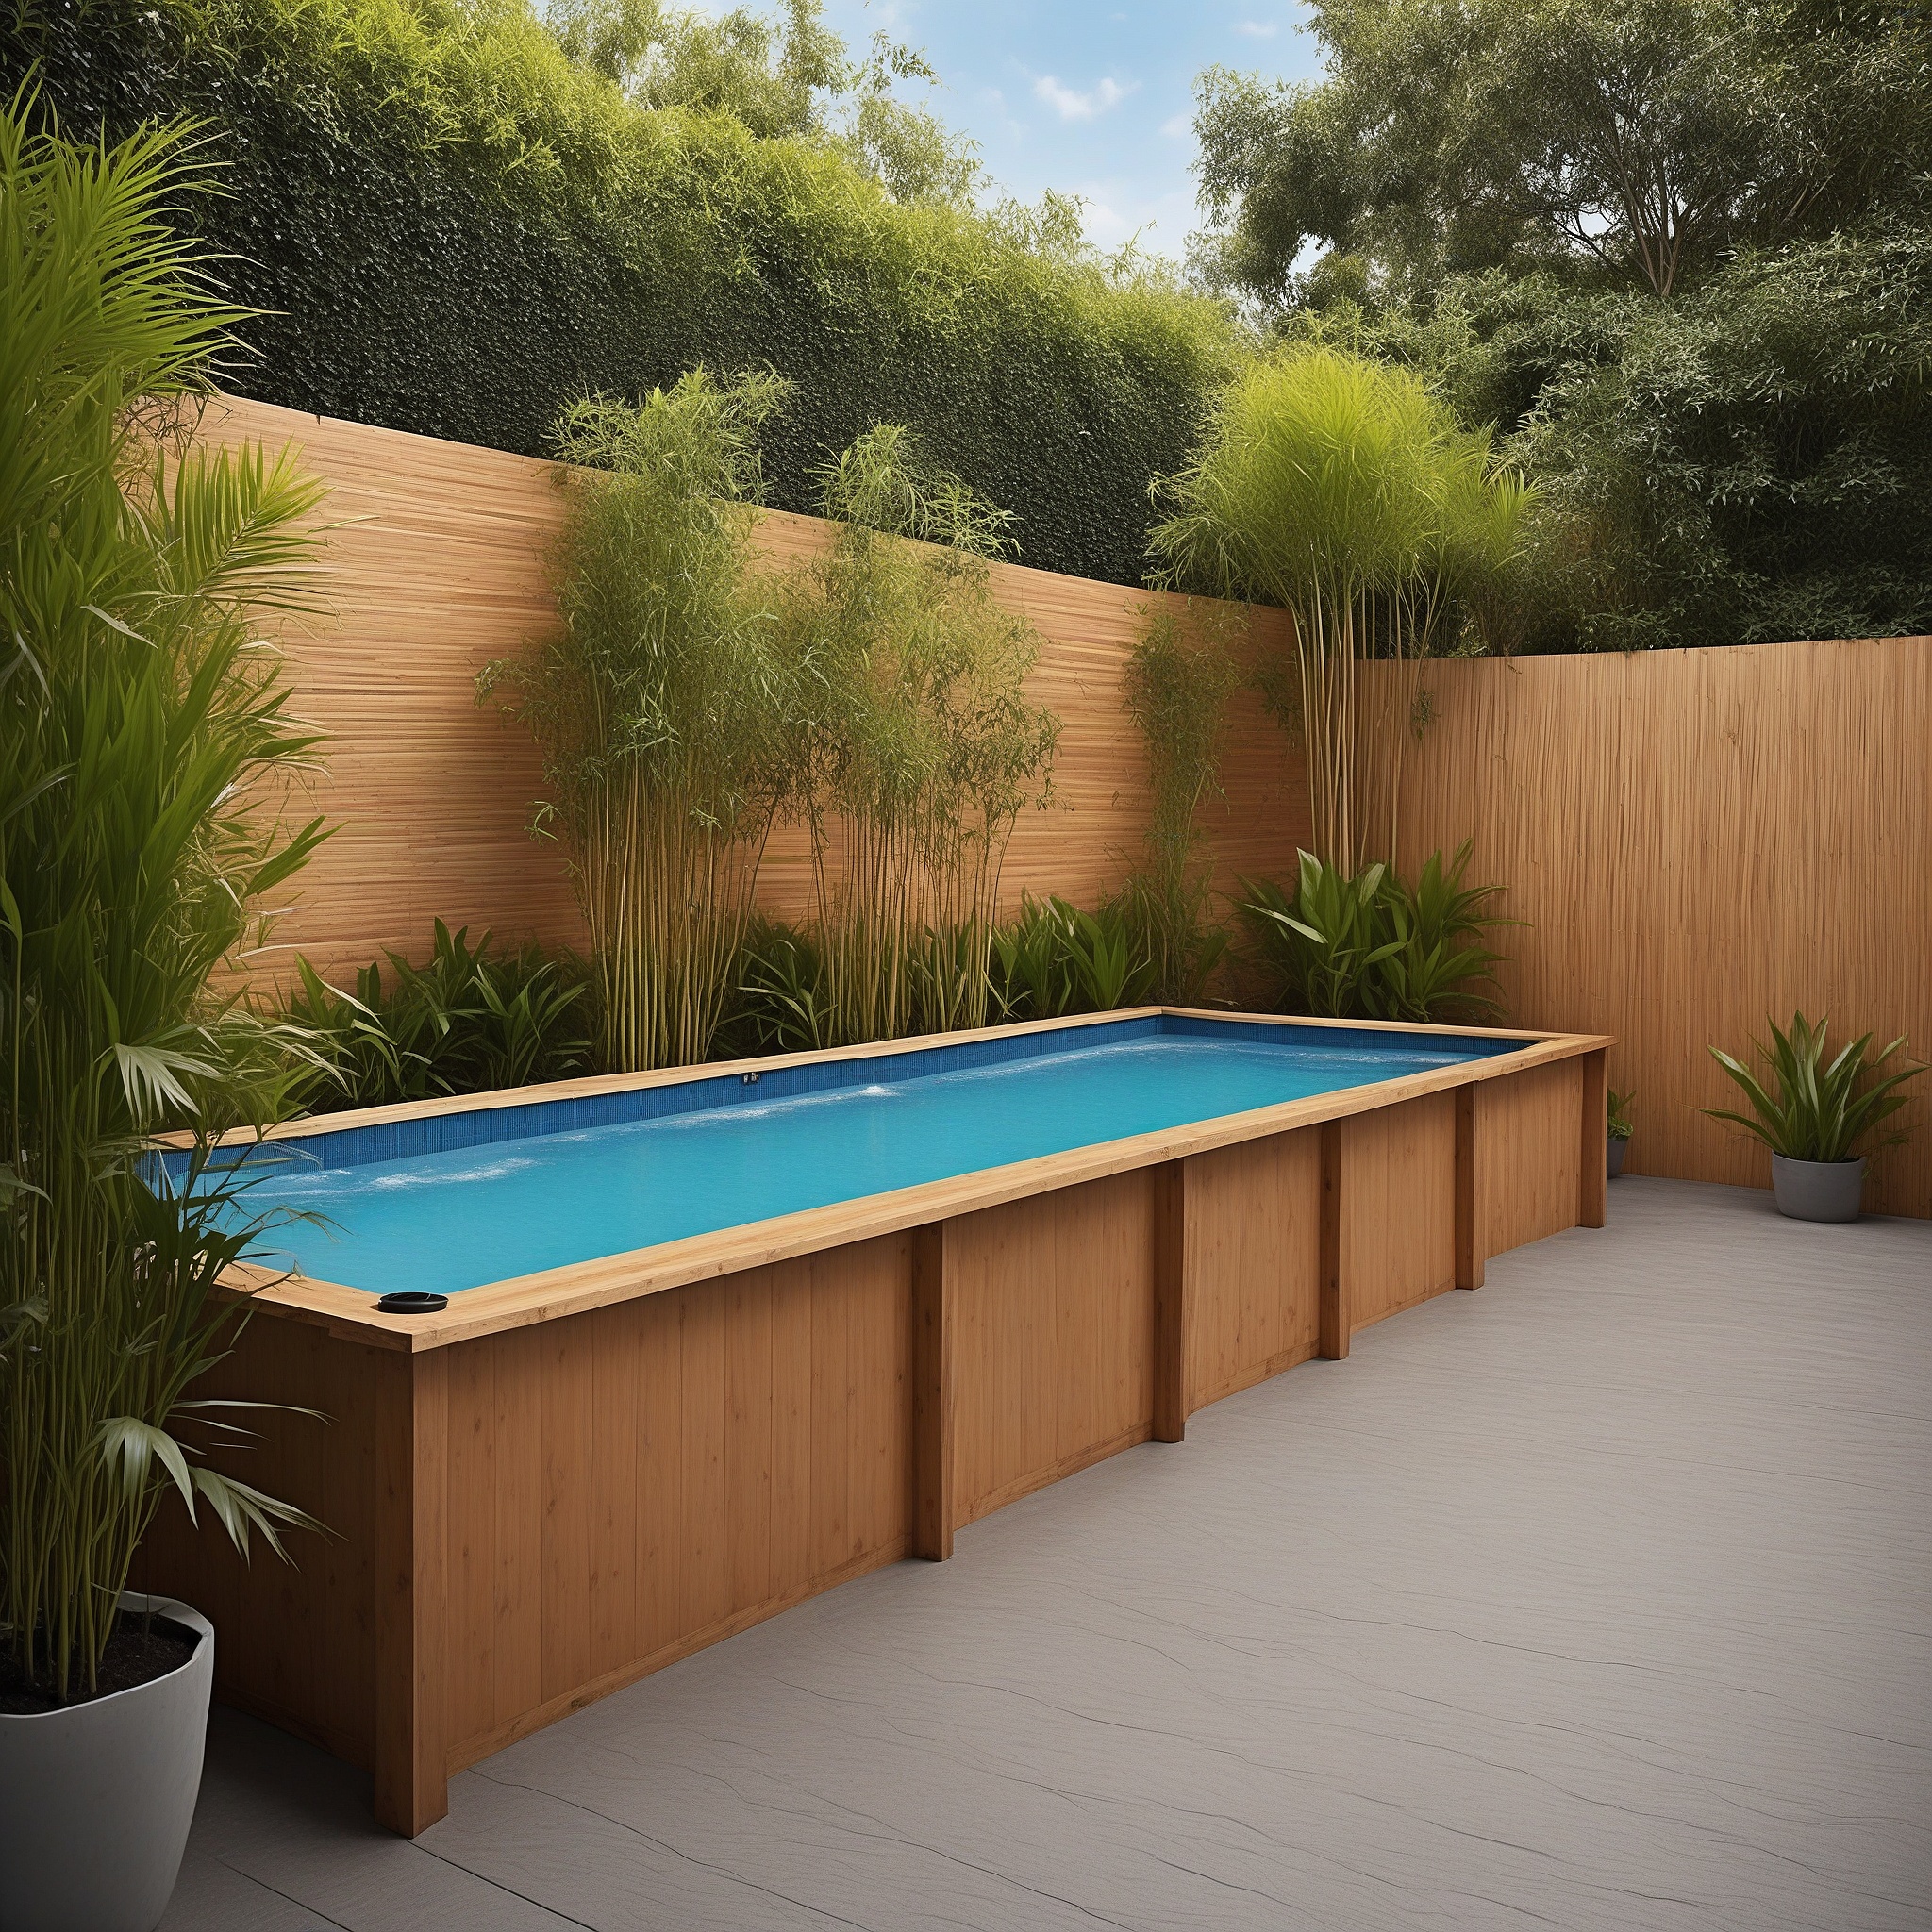 Above-Ground Pool Surrounded by a Tall Wooden Privacy Fence and Lush Bamboo Plant